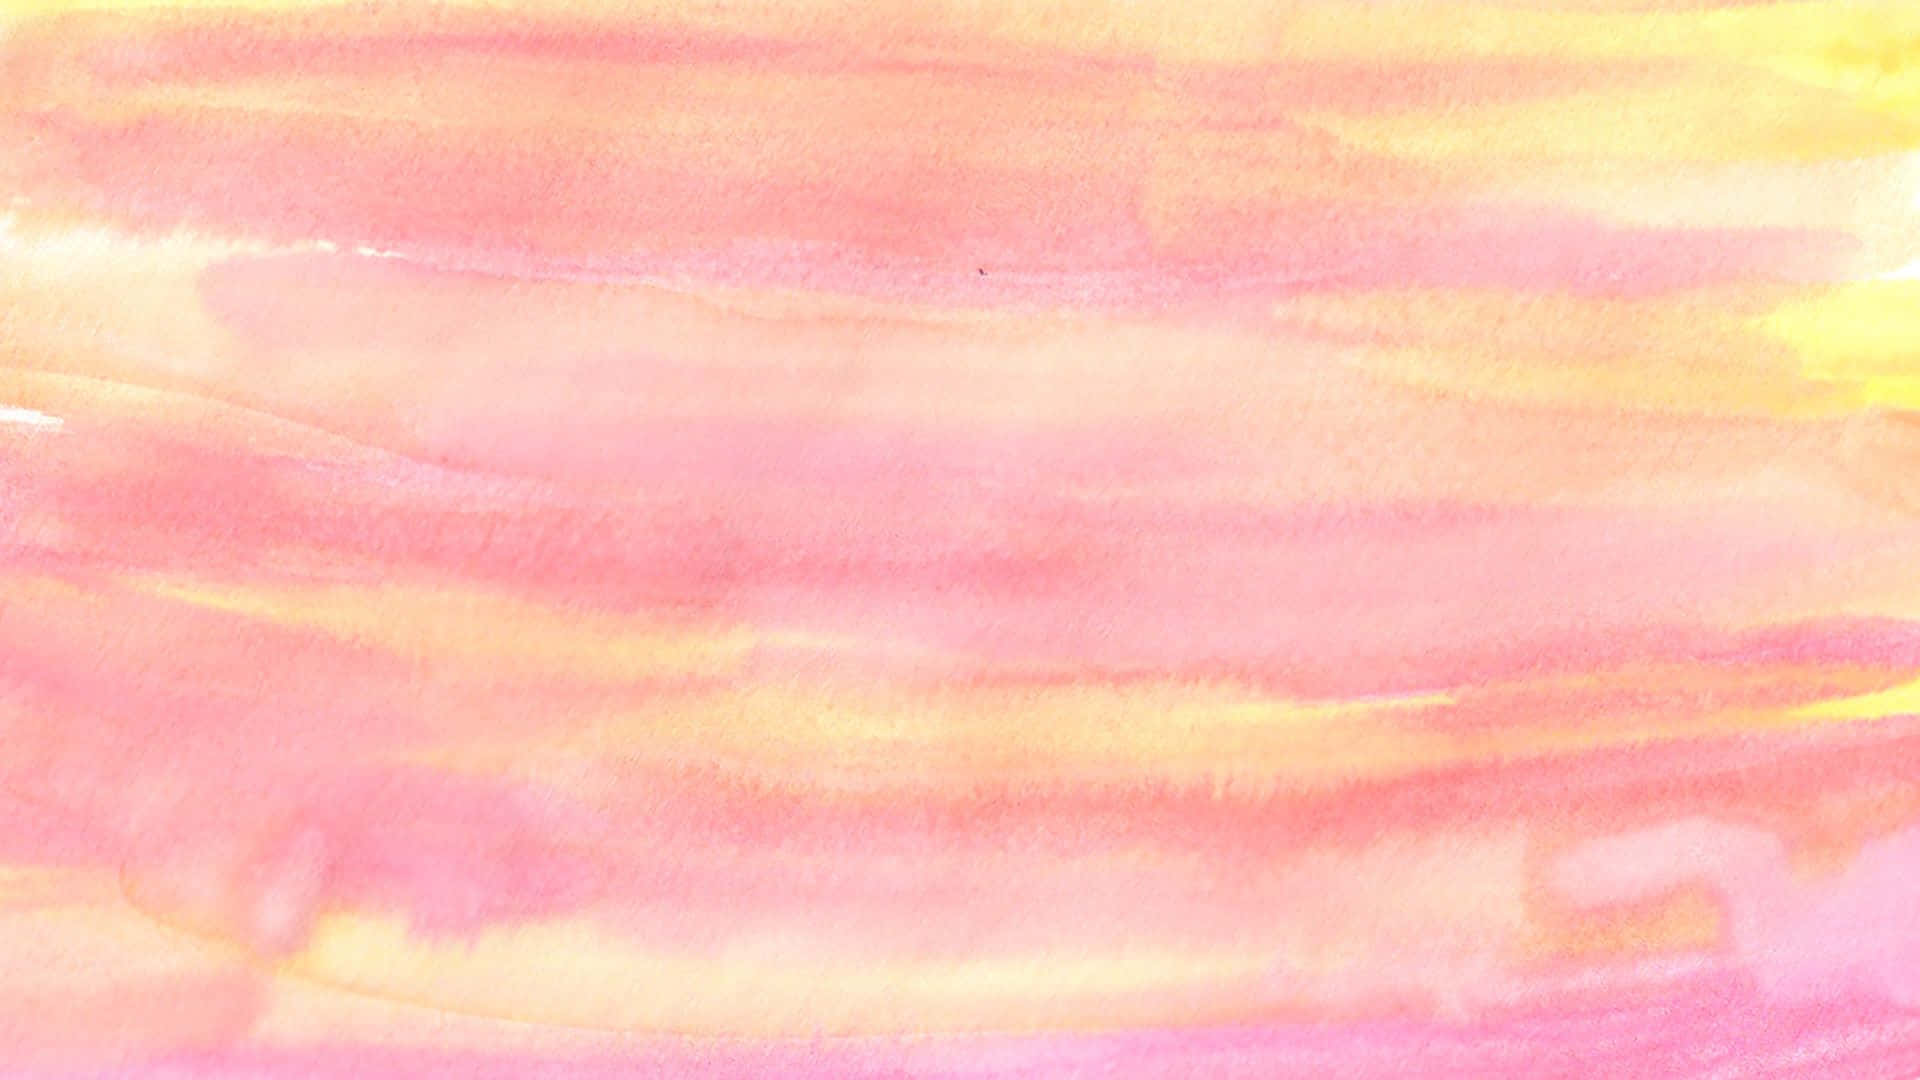 Watercolor Background - Pink And Yellow Watercolor Painting